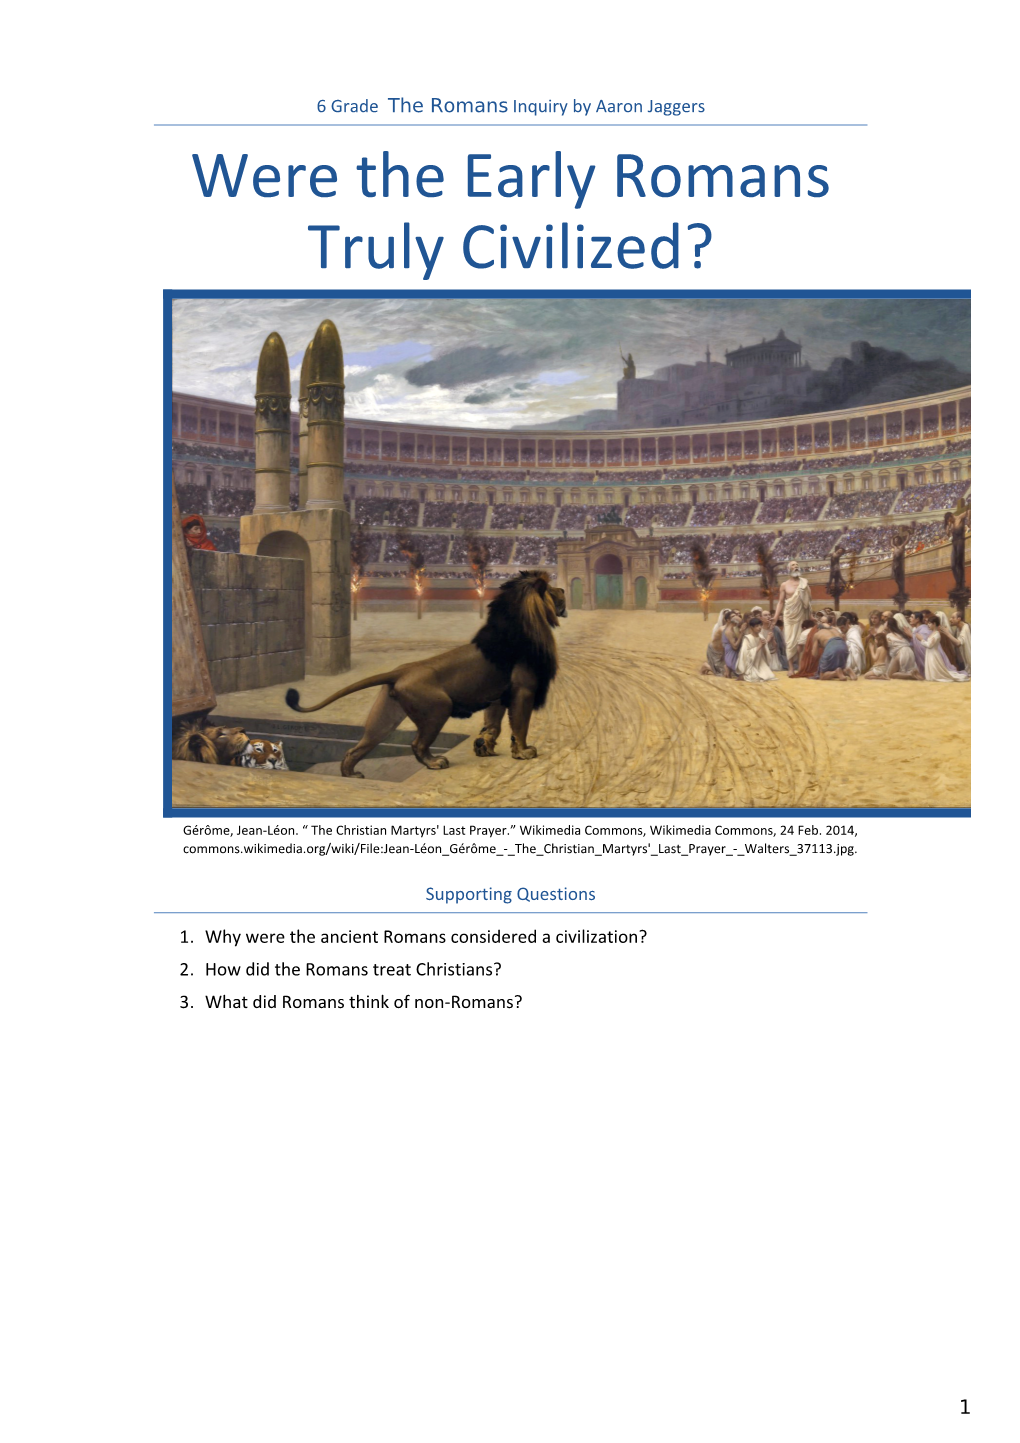 Were the Early Romans Truly Civilized?